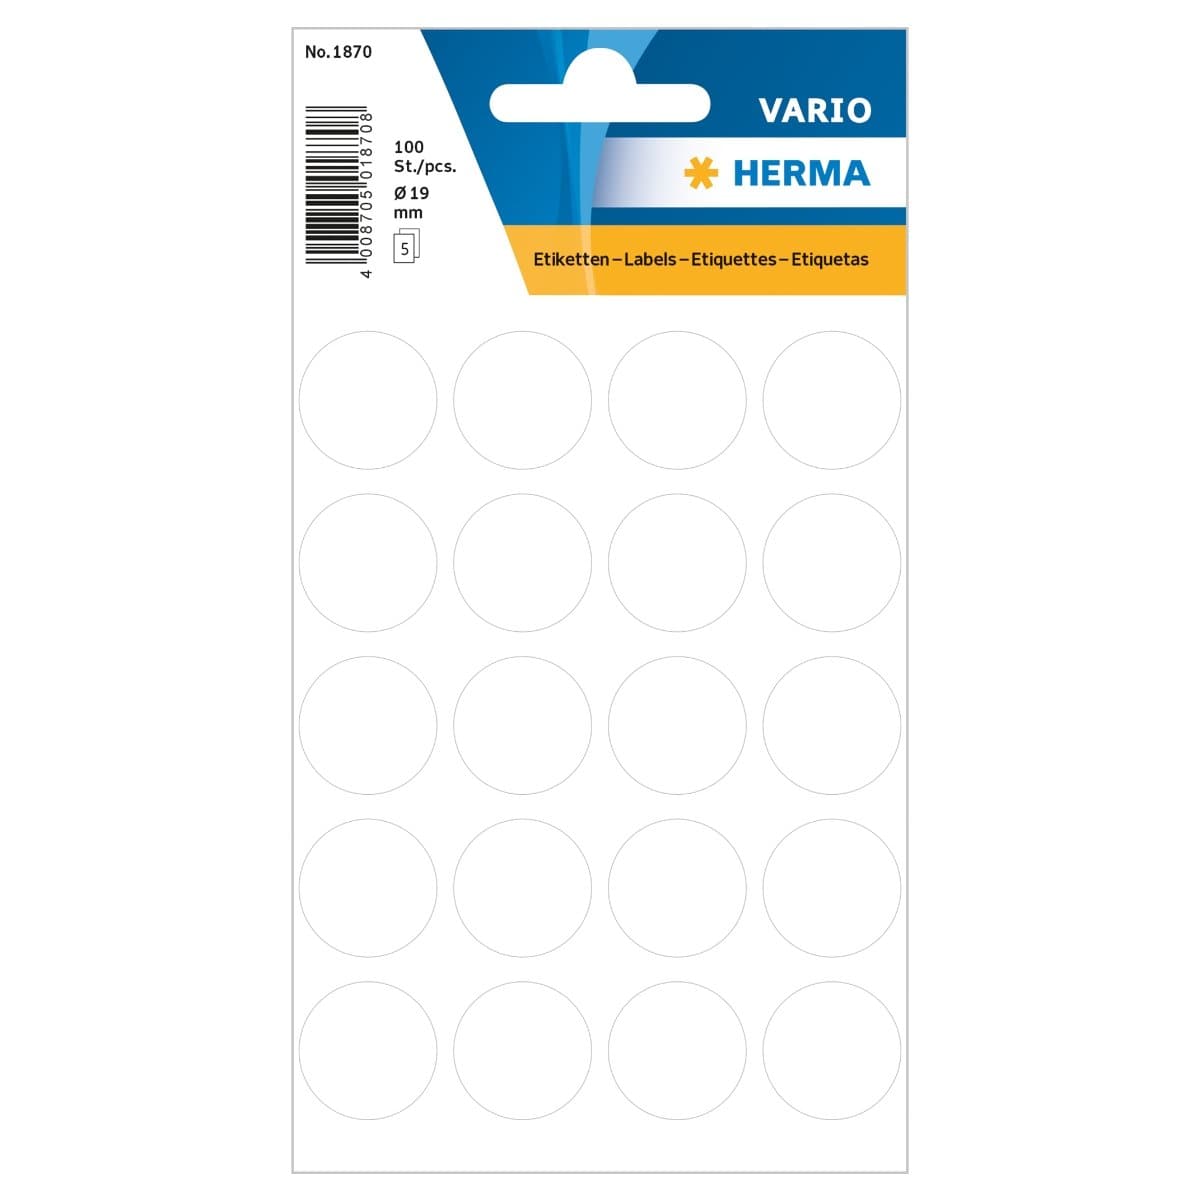 Herma Vario Sticker Color Dots, 19 mm, 100/pack, White